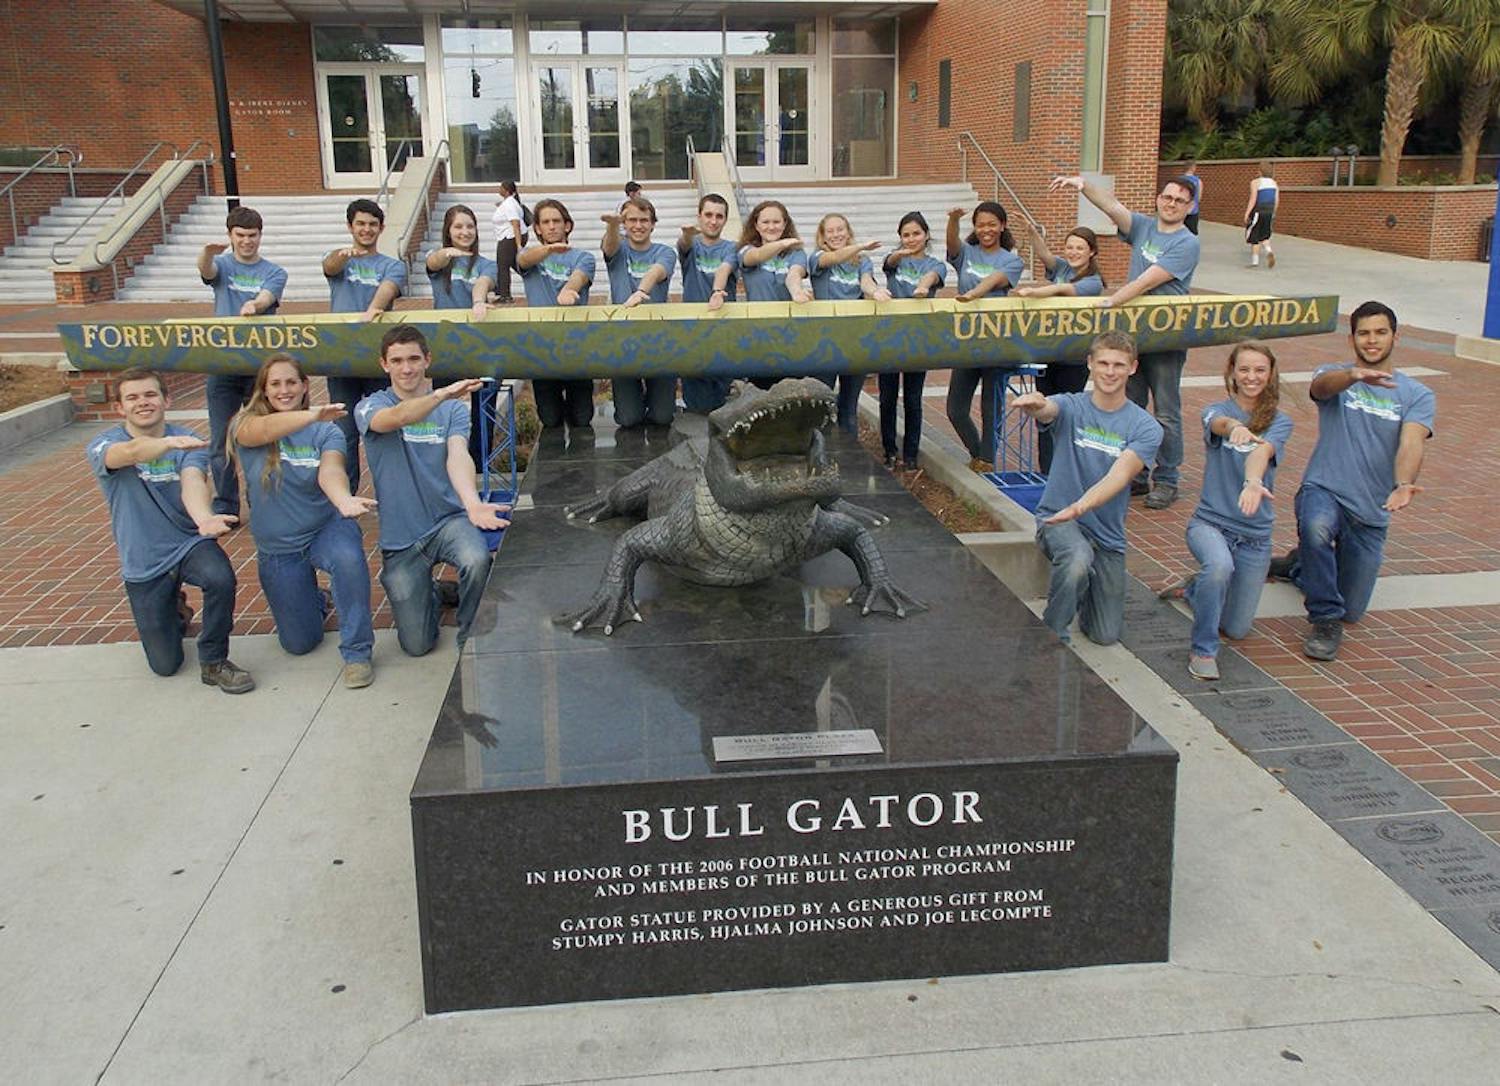 The UF Concrete Canoe team poses with the Bull Gator outside Ben Hill Griffin Stadium.